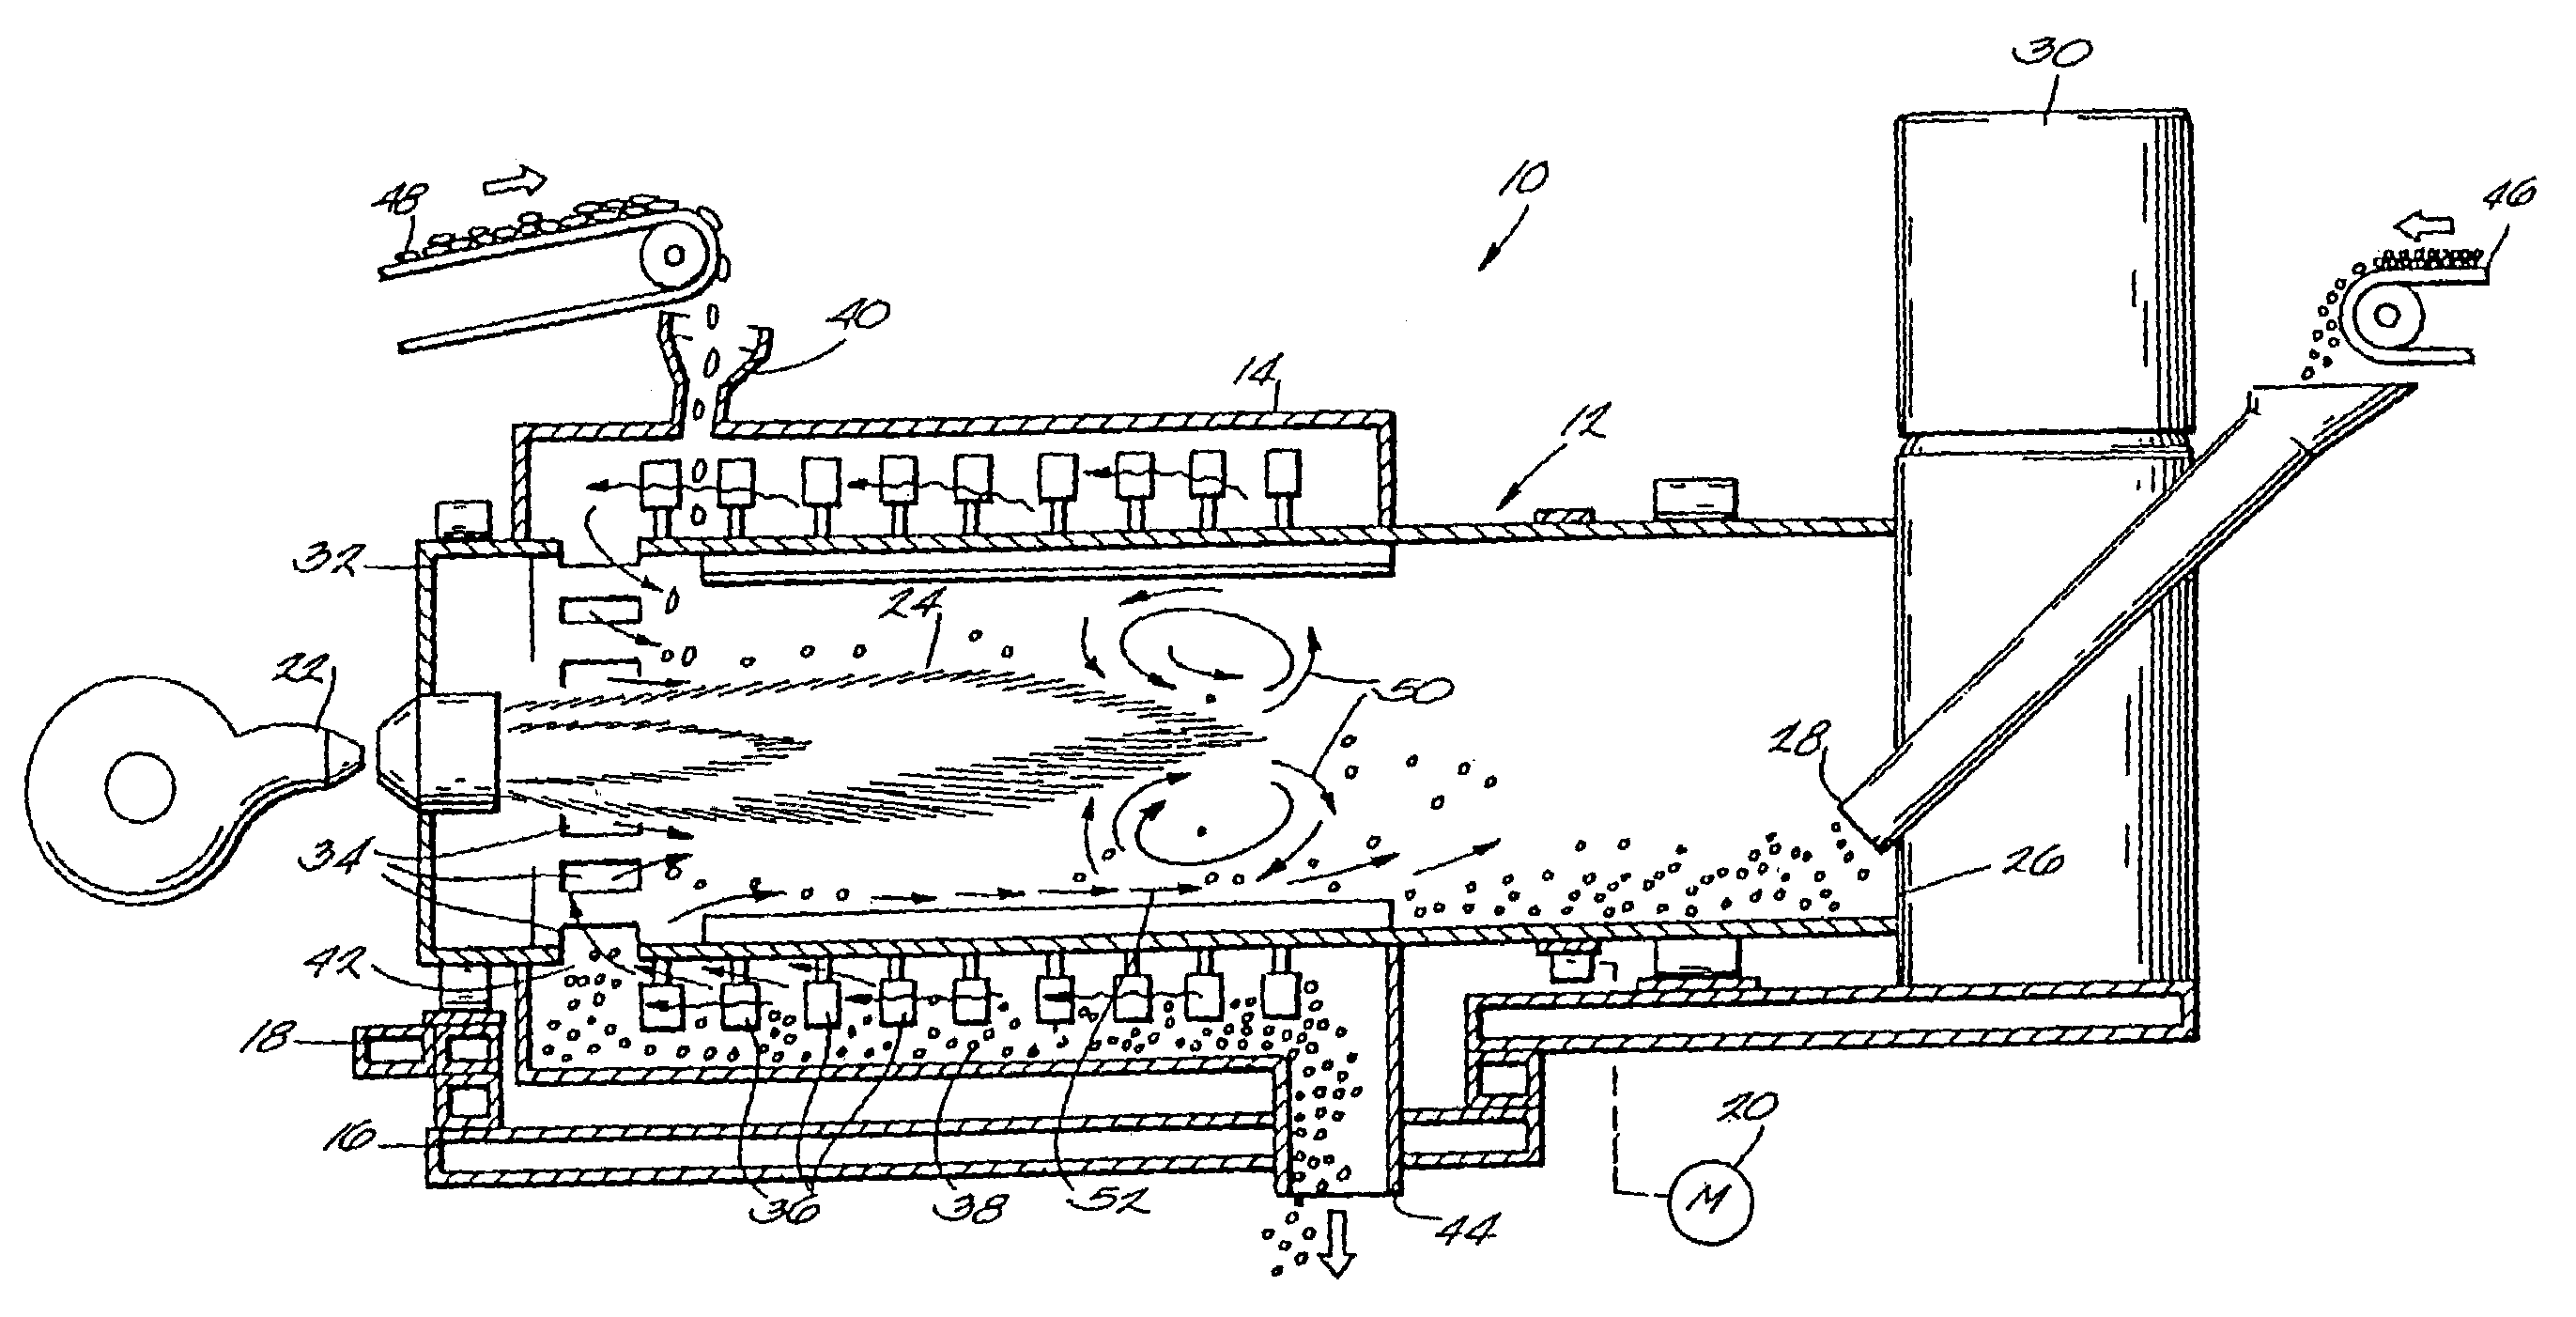 Apparatus and method for a hot mix asphalt plant using a high percentage of recycled asphalt products